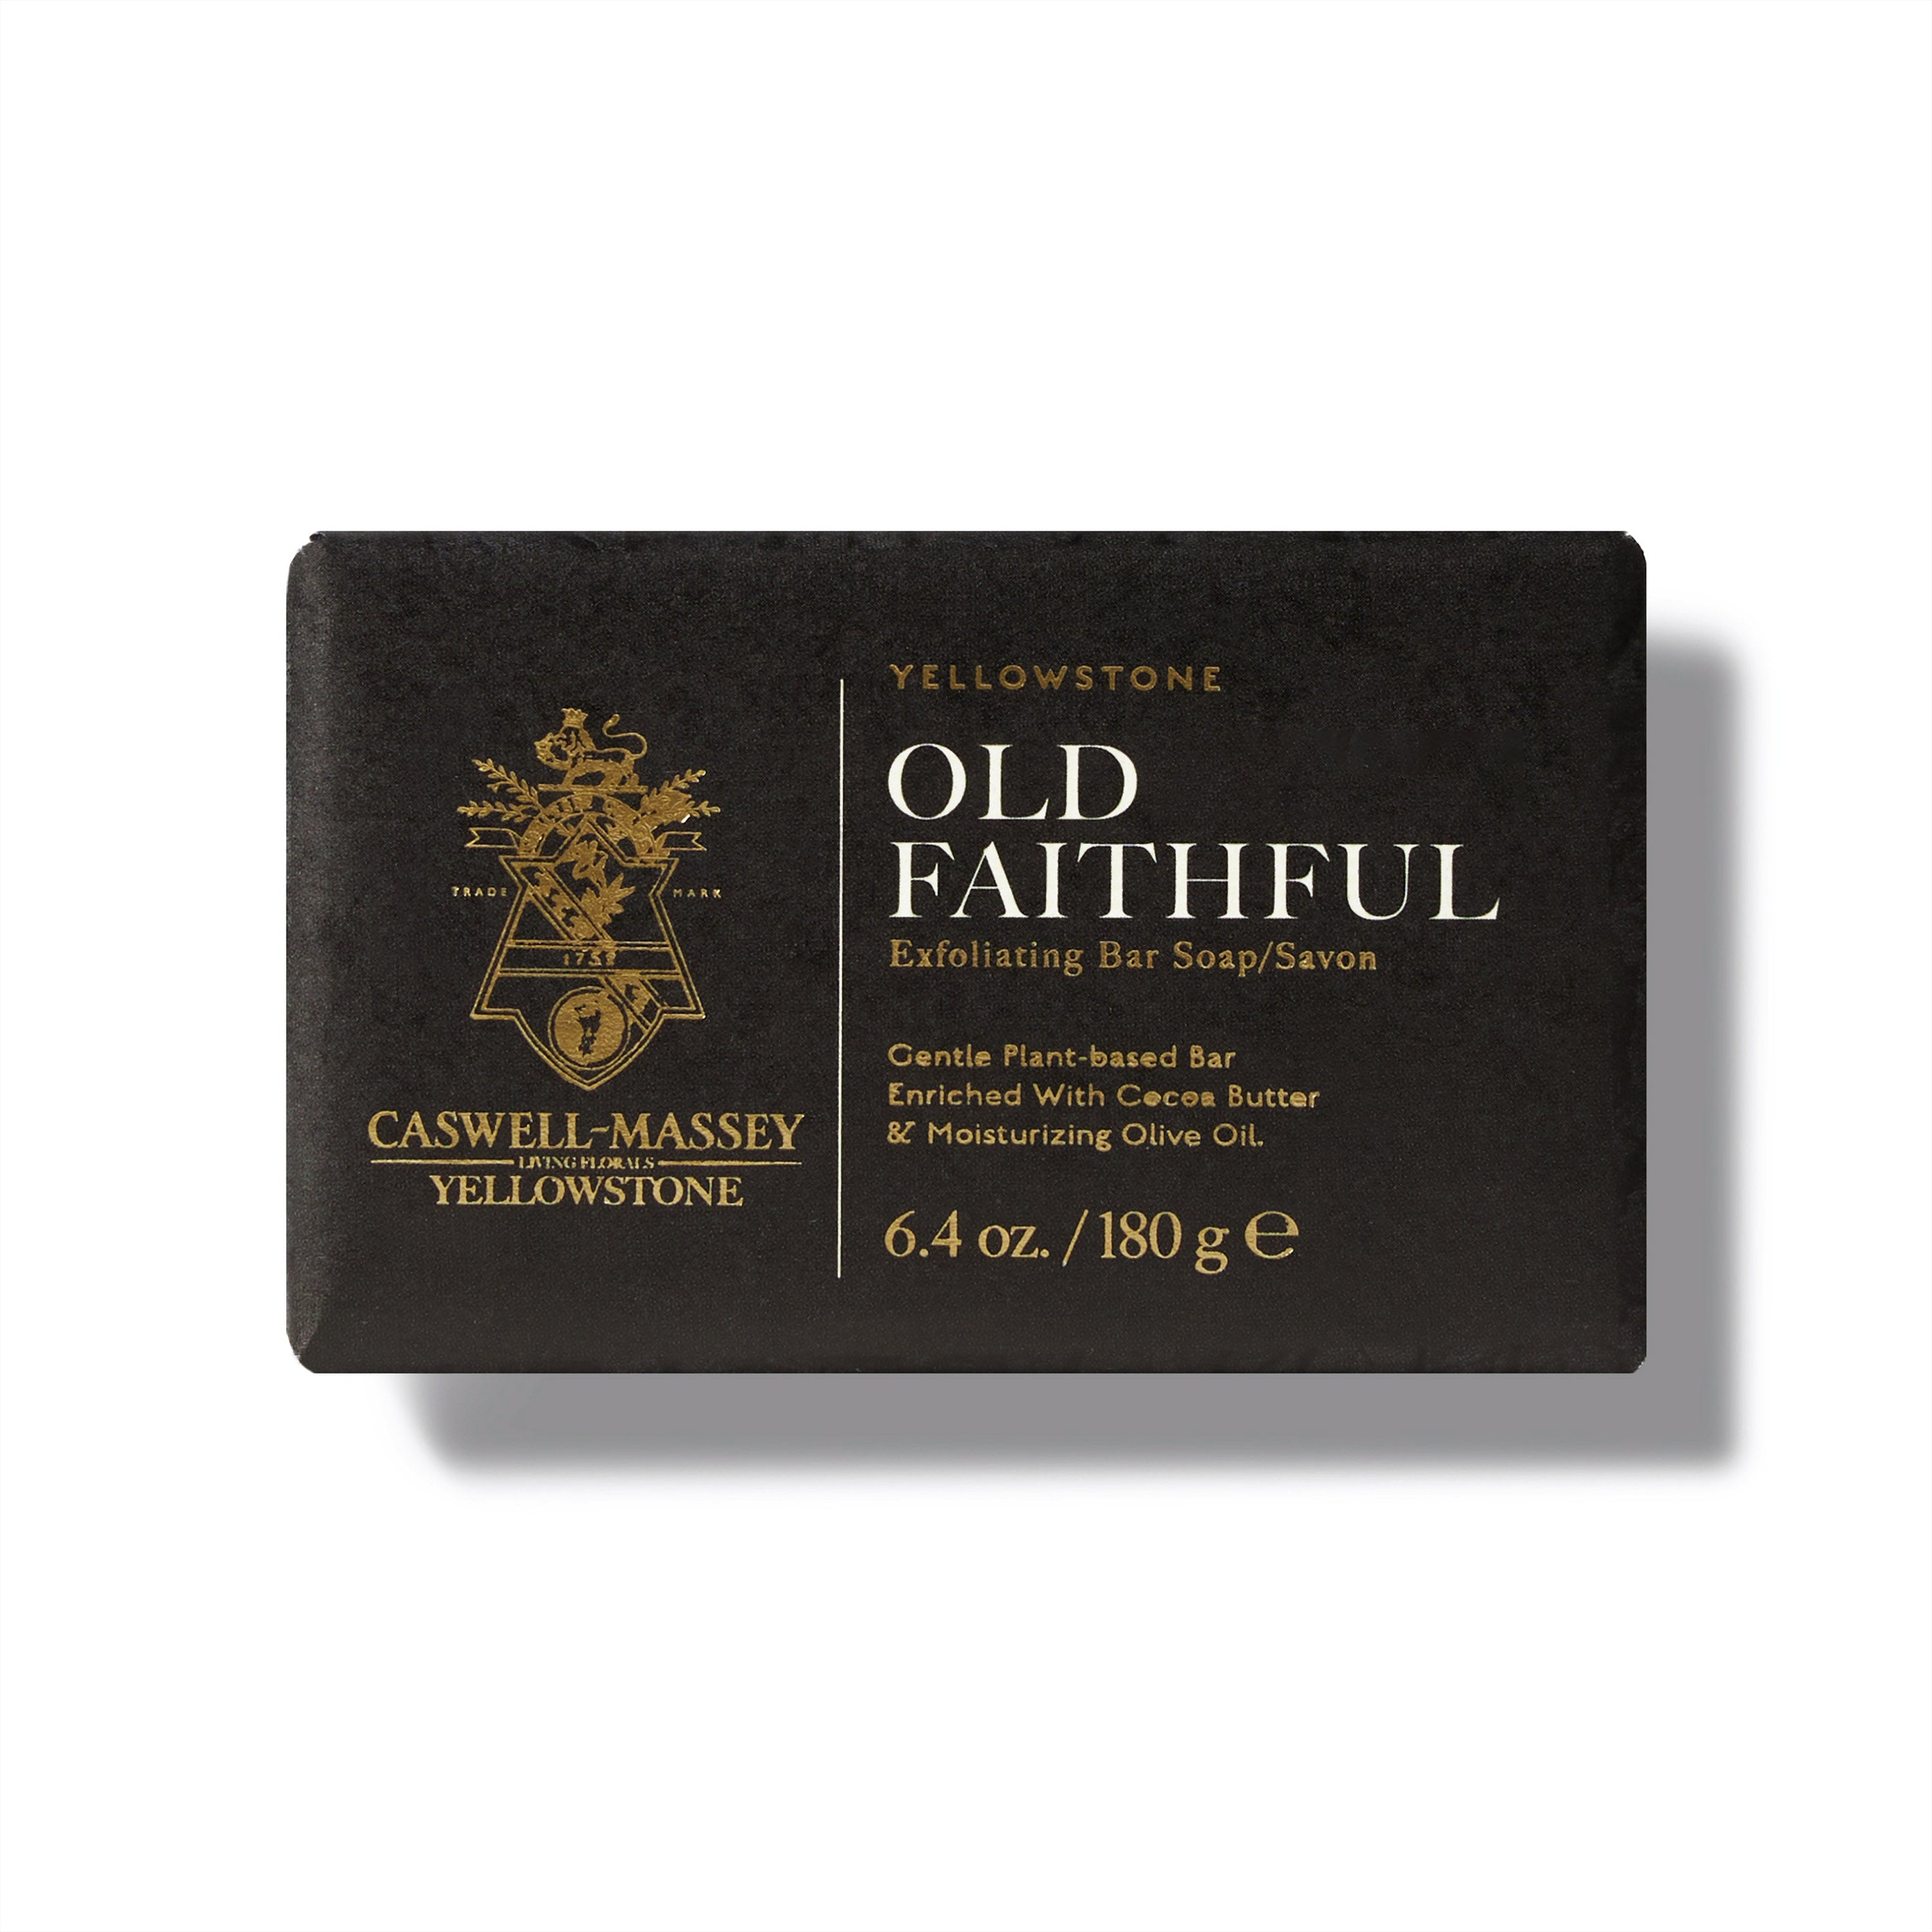 Caswell-Massey® Yellowstone Old Faithful Bar Soap shown with outer packaging